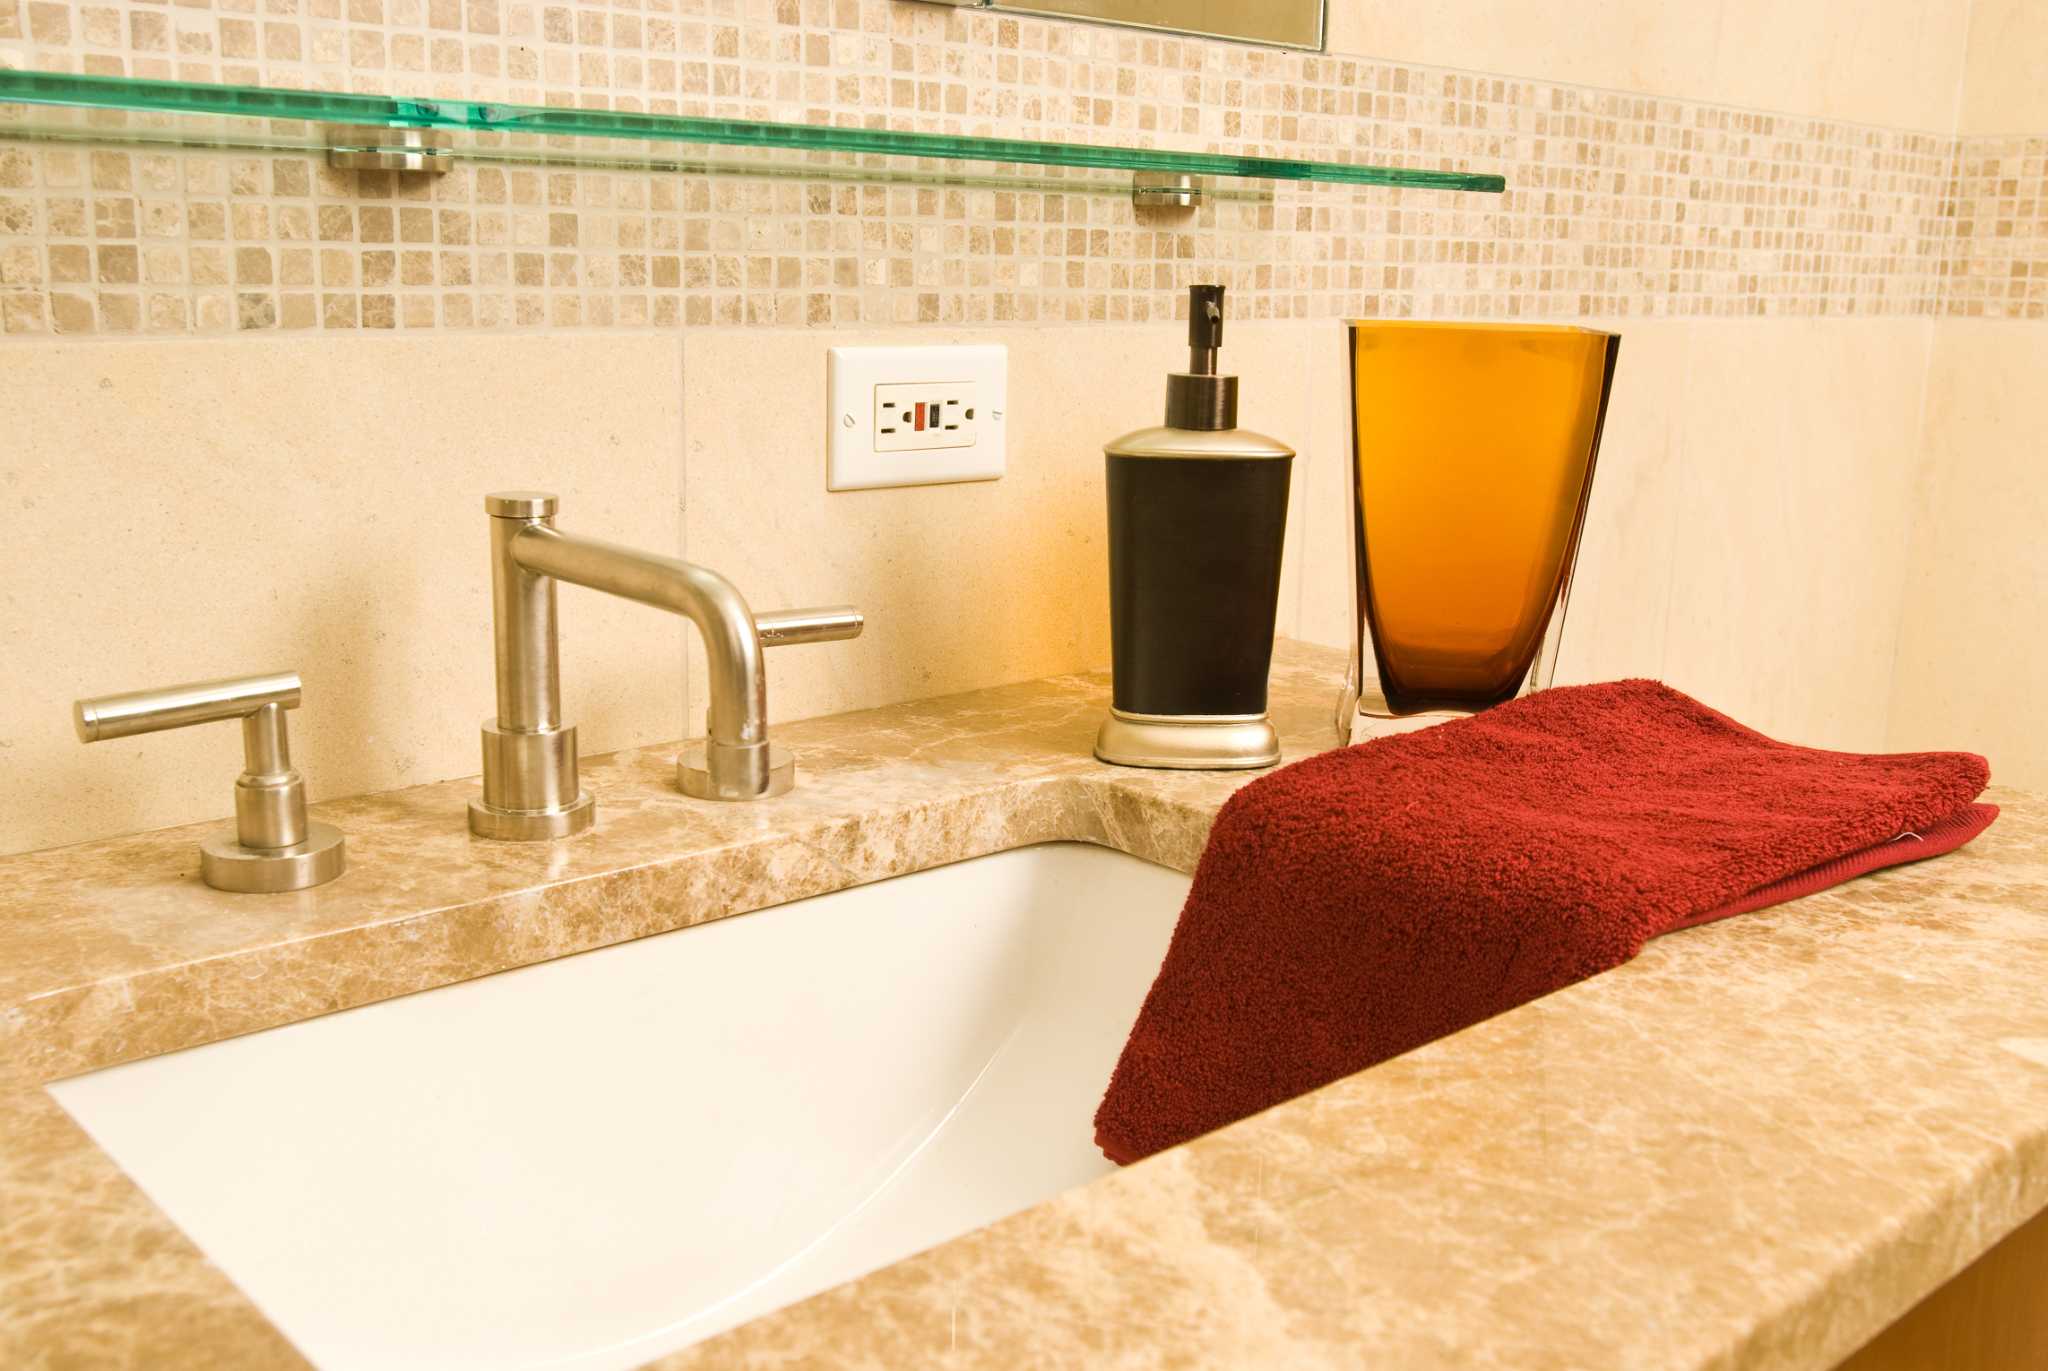 No Space Around The Sink For A Towel Bar? Here's Your Solution